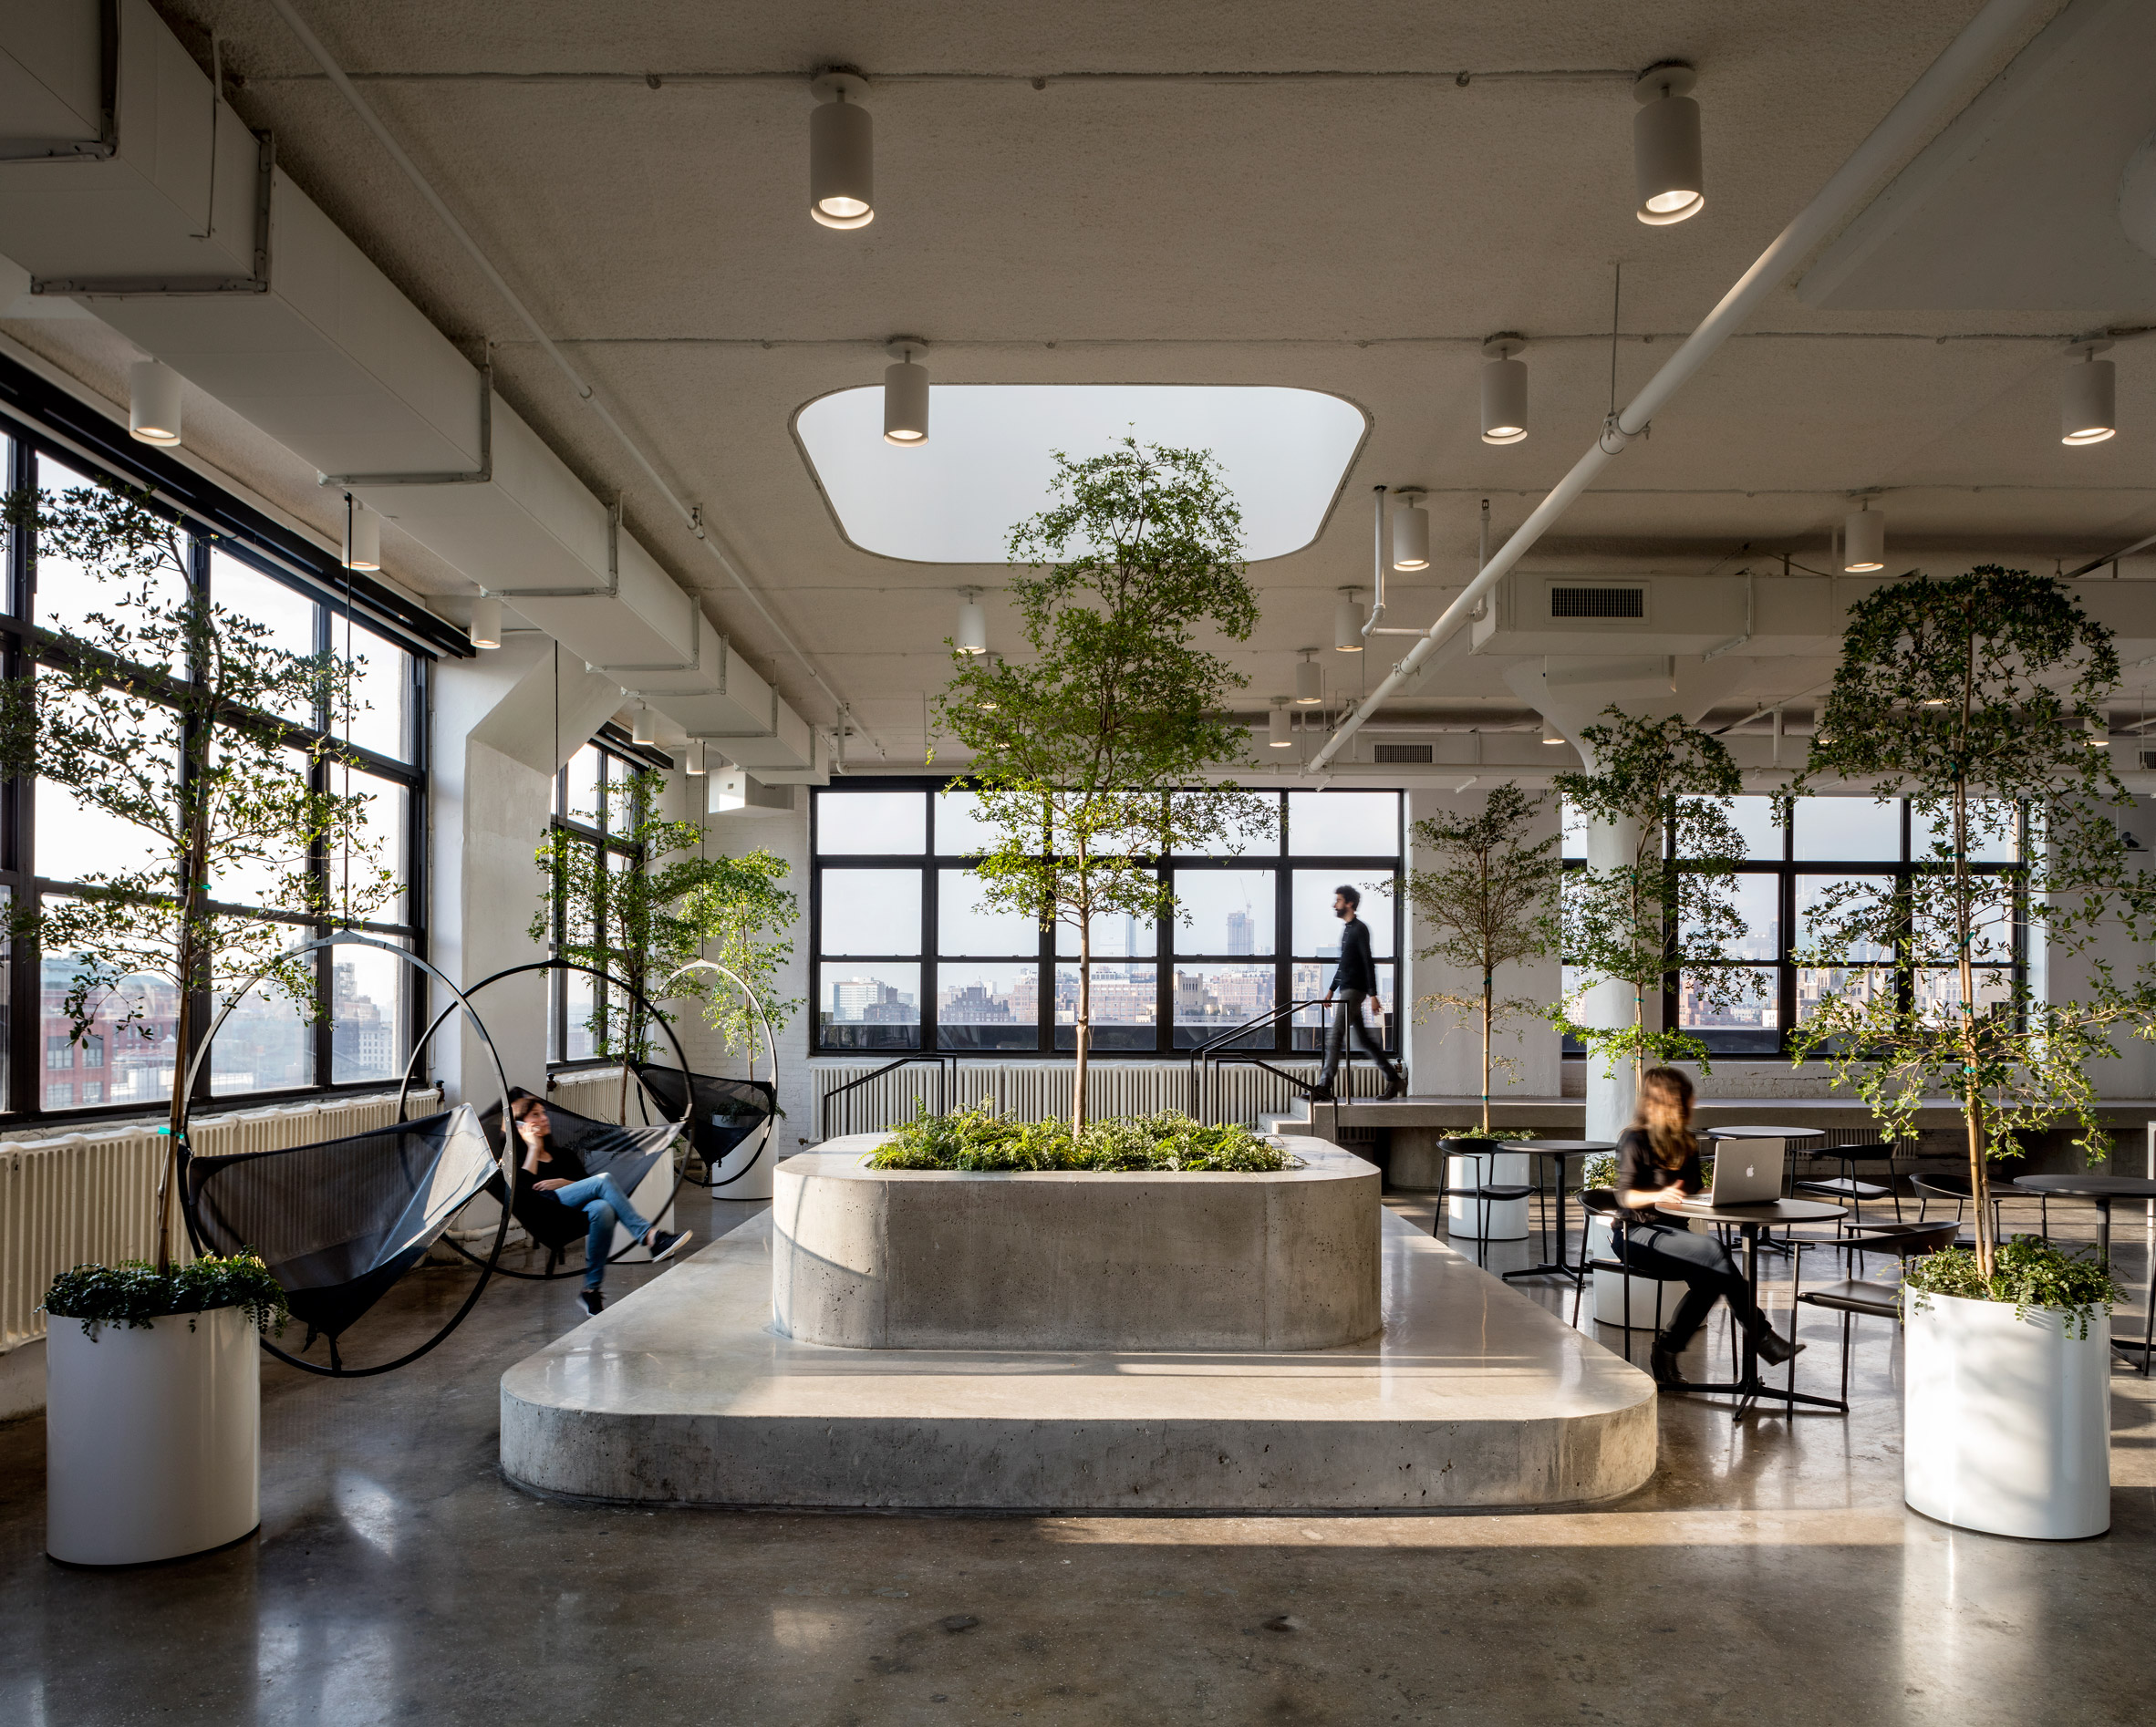 Squarespace offices by A+I